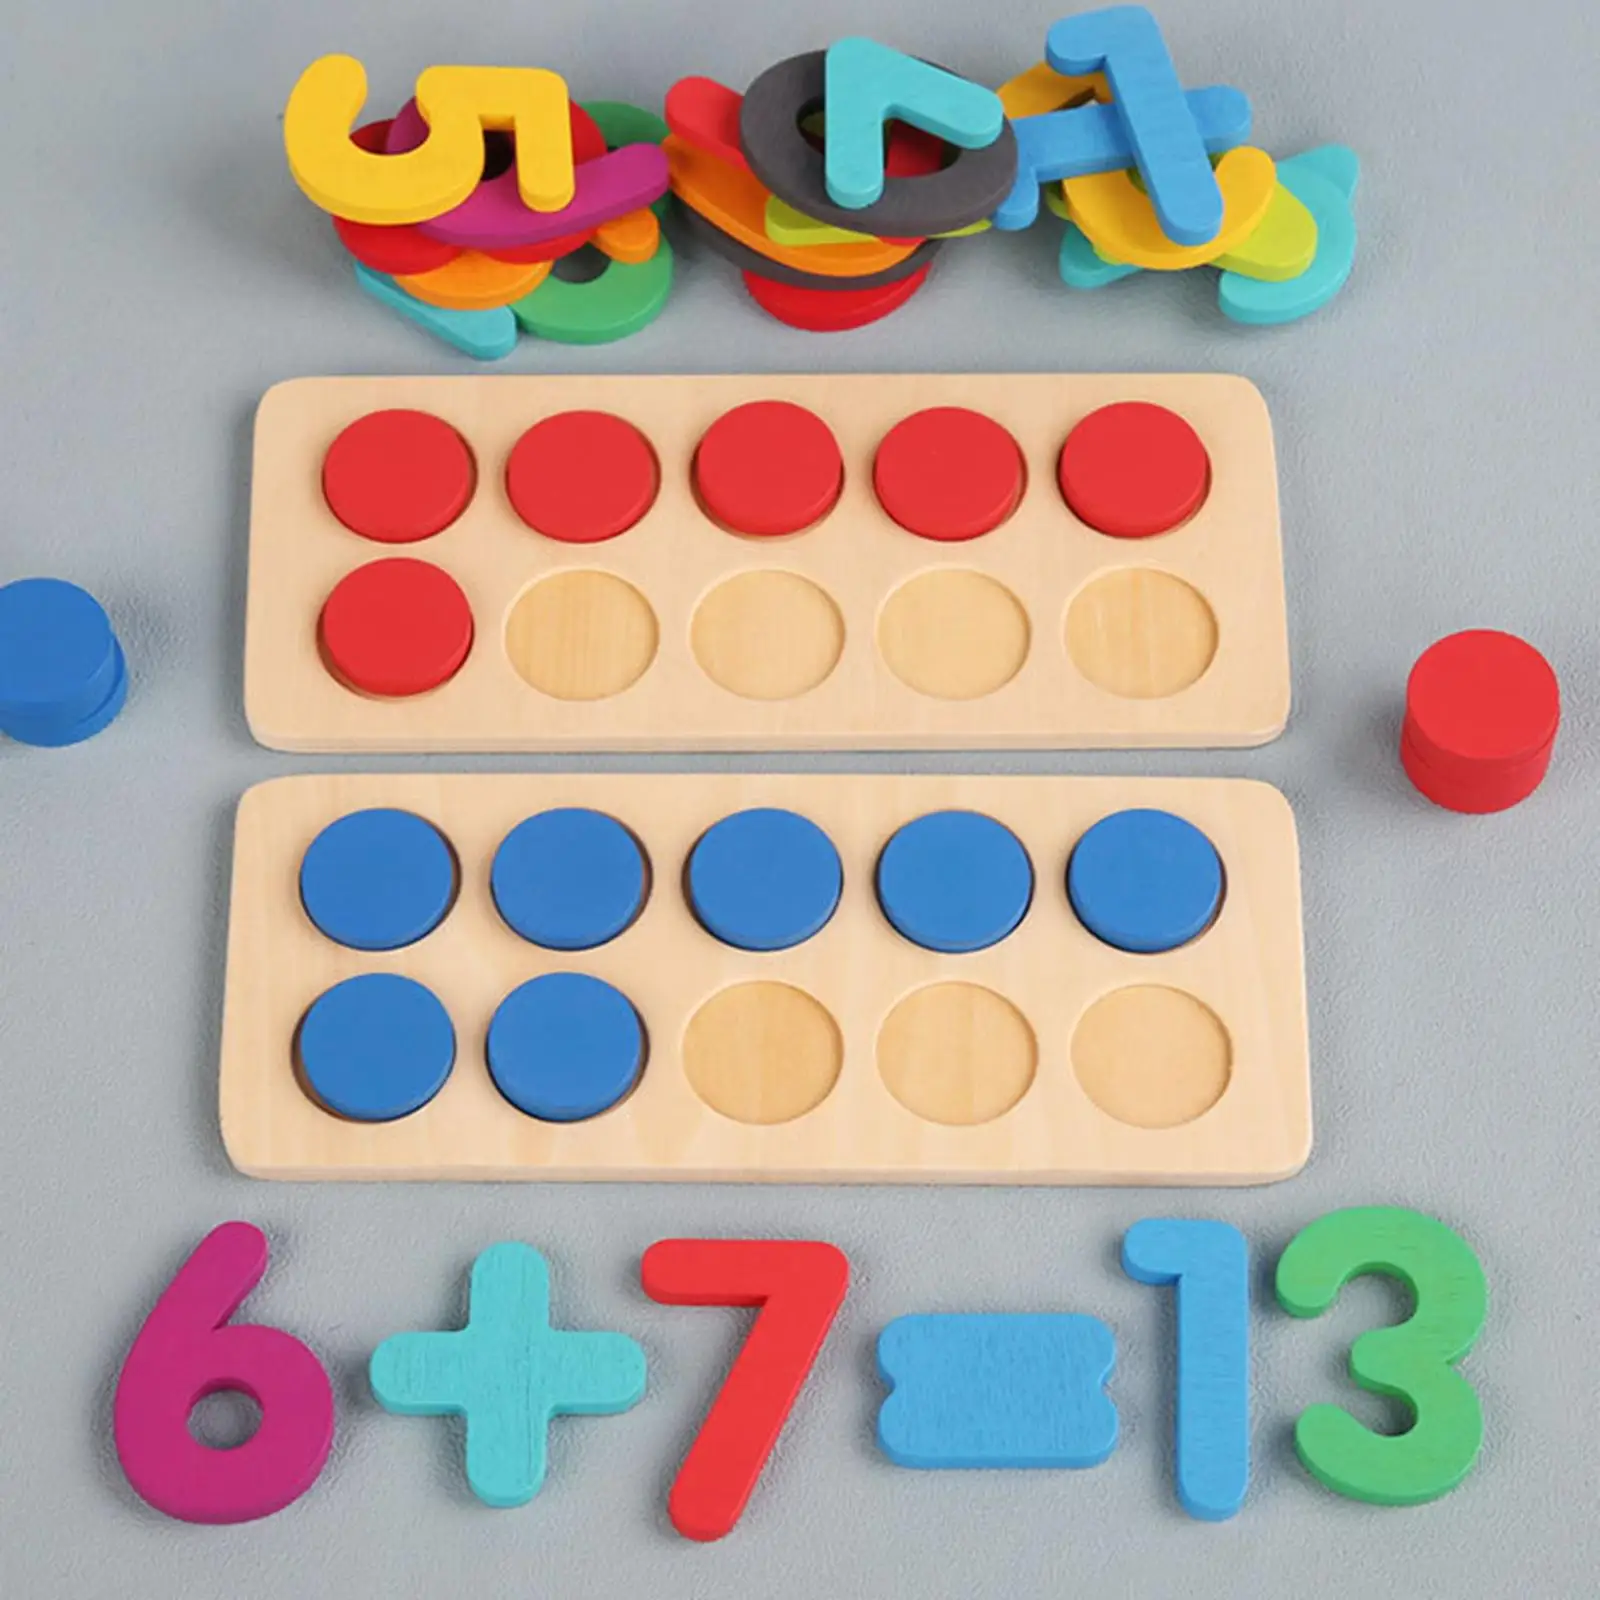 Montessori Toys Number Counting Games for Elementary Home Kindergarten Kids